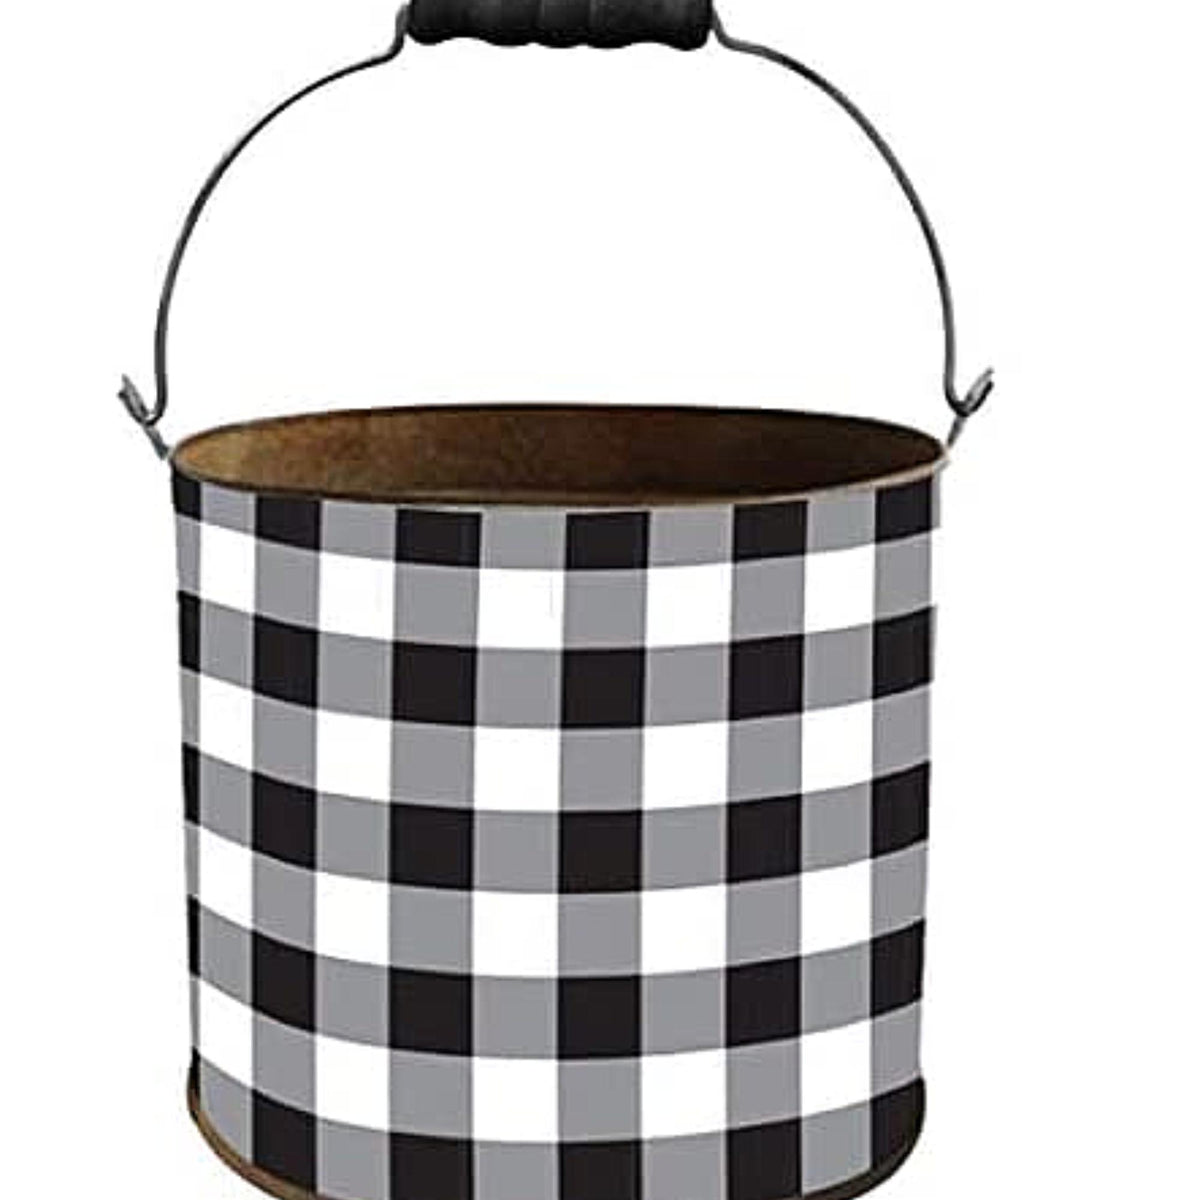 HOSLEY® Iron Check Pot/ Planter, Black and White Color, 7inches High